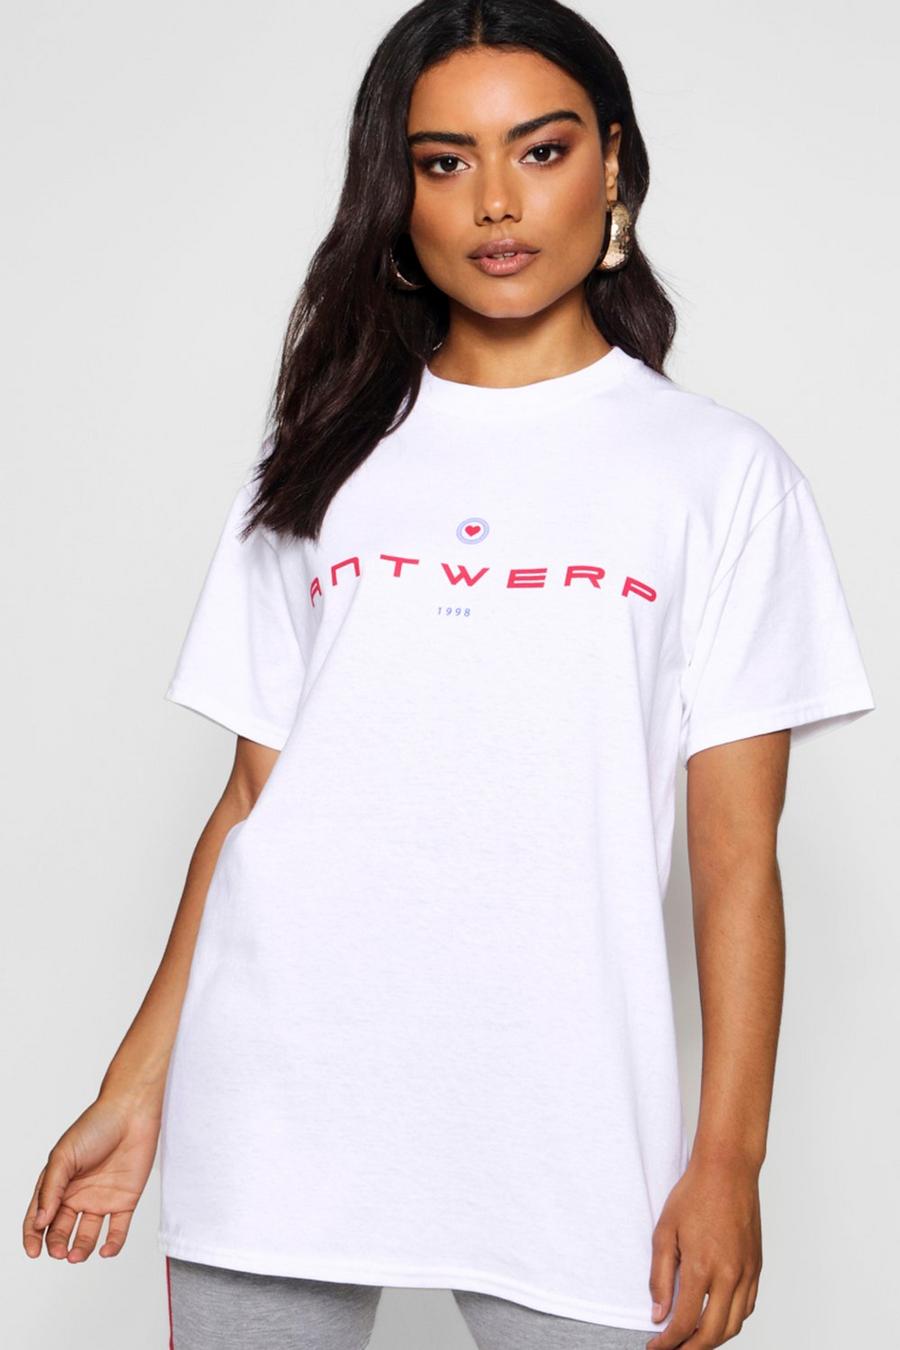 White Antwerp 1998 Graphic T-Shirt image number 1